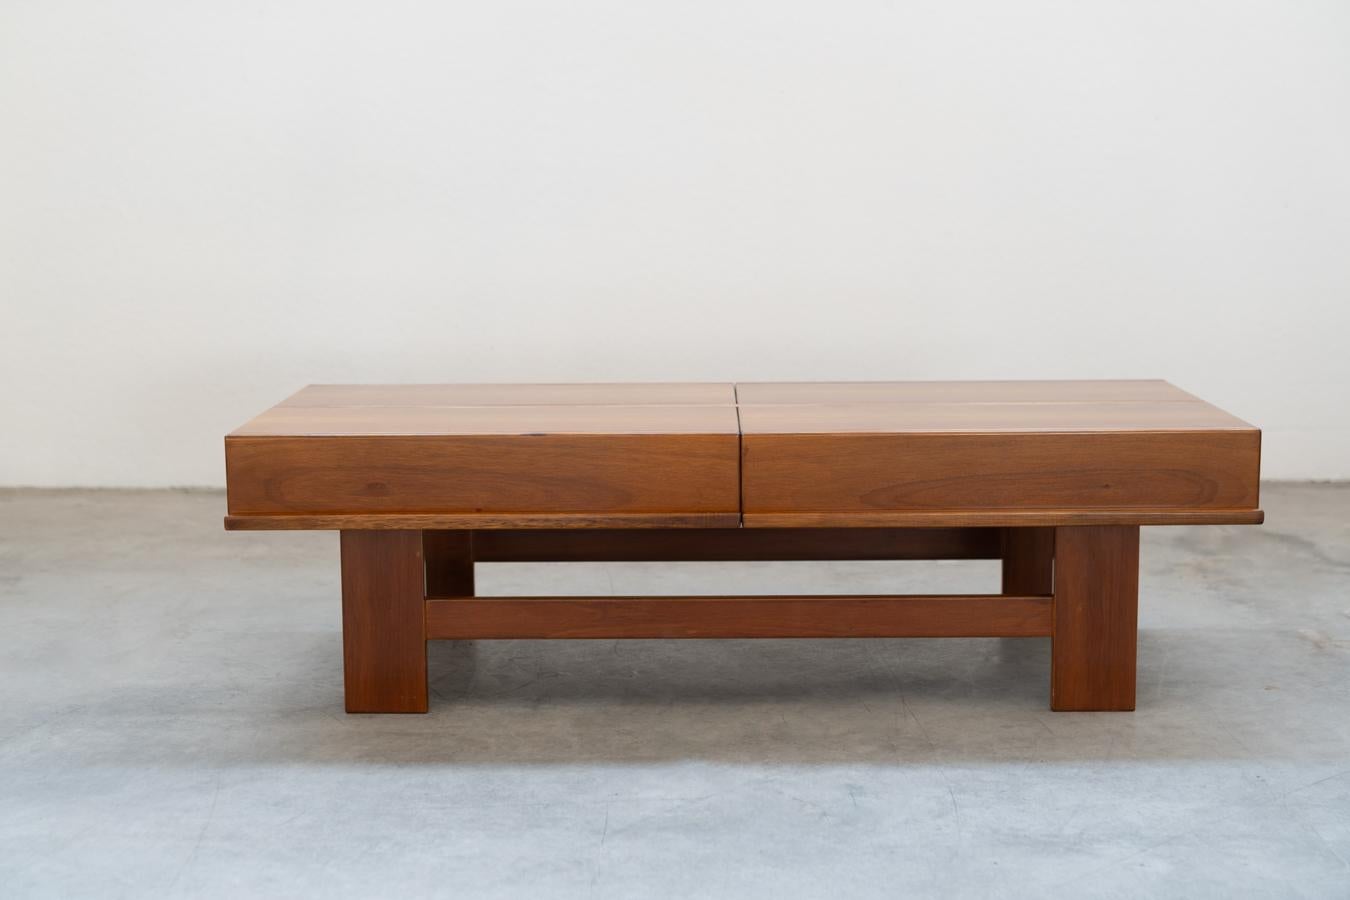 Walnut coffee table with compartment by Michelucci, 1970
Designed in walnut veneer in 1974
Style
Vintage
Periodo del design
1970 - 1979
Production Period
1970 - 1979
Year Manufactured
1970
Country of Manufacture
Italy
Maker
Michelucci,